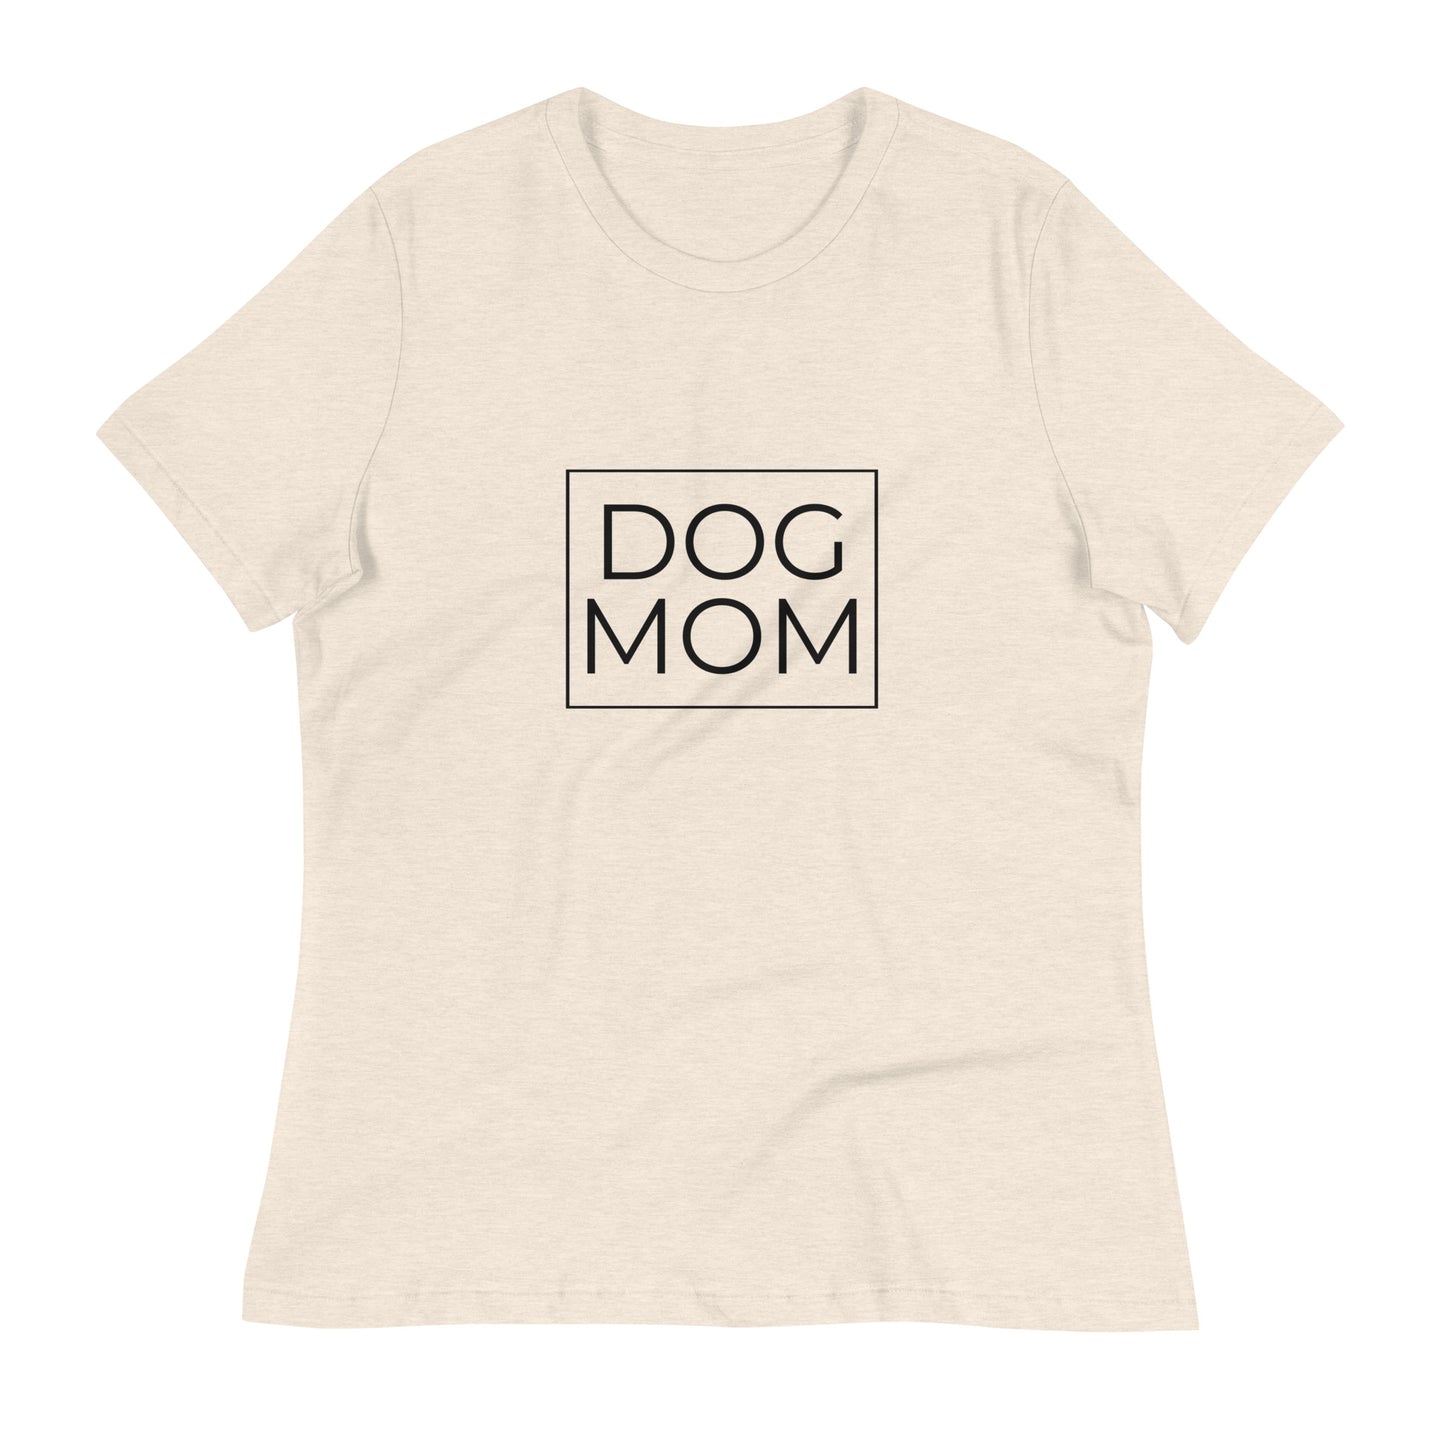 Dog Mom Graphic Women's Relaxed T-Shirt